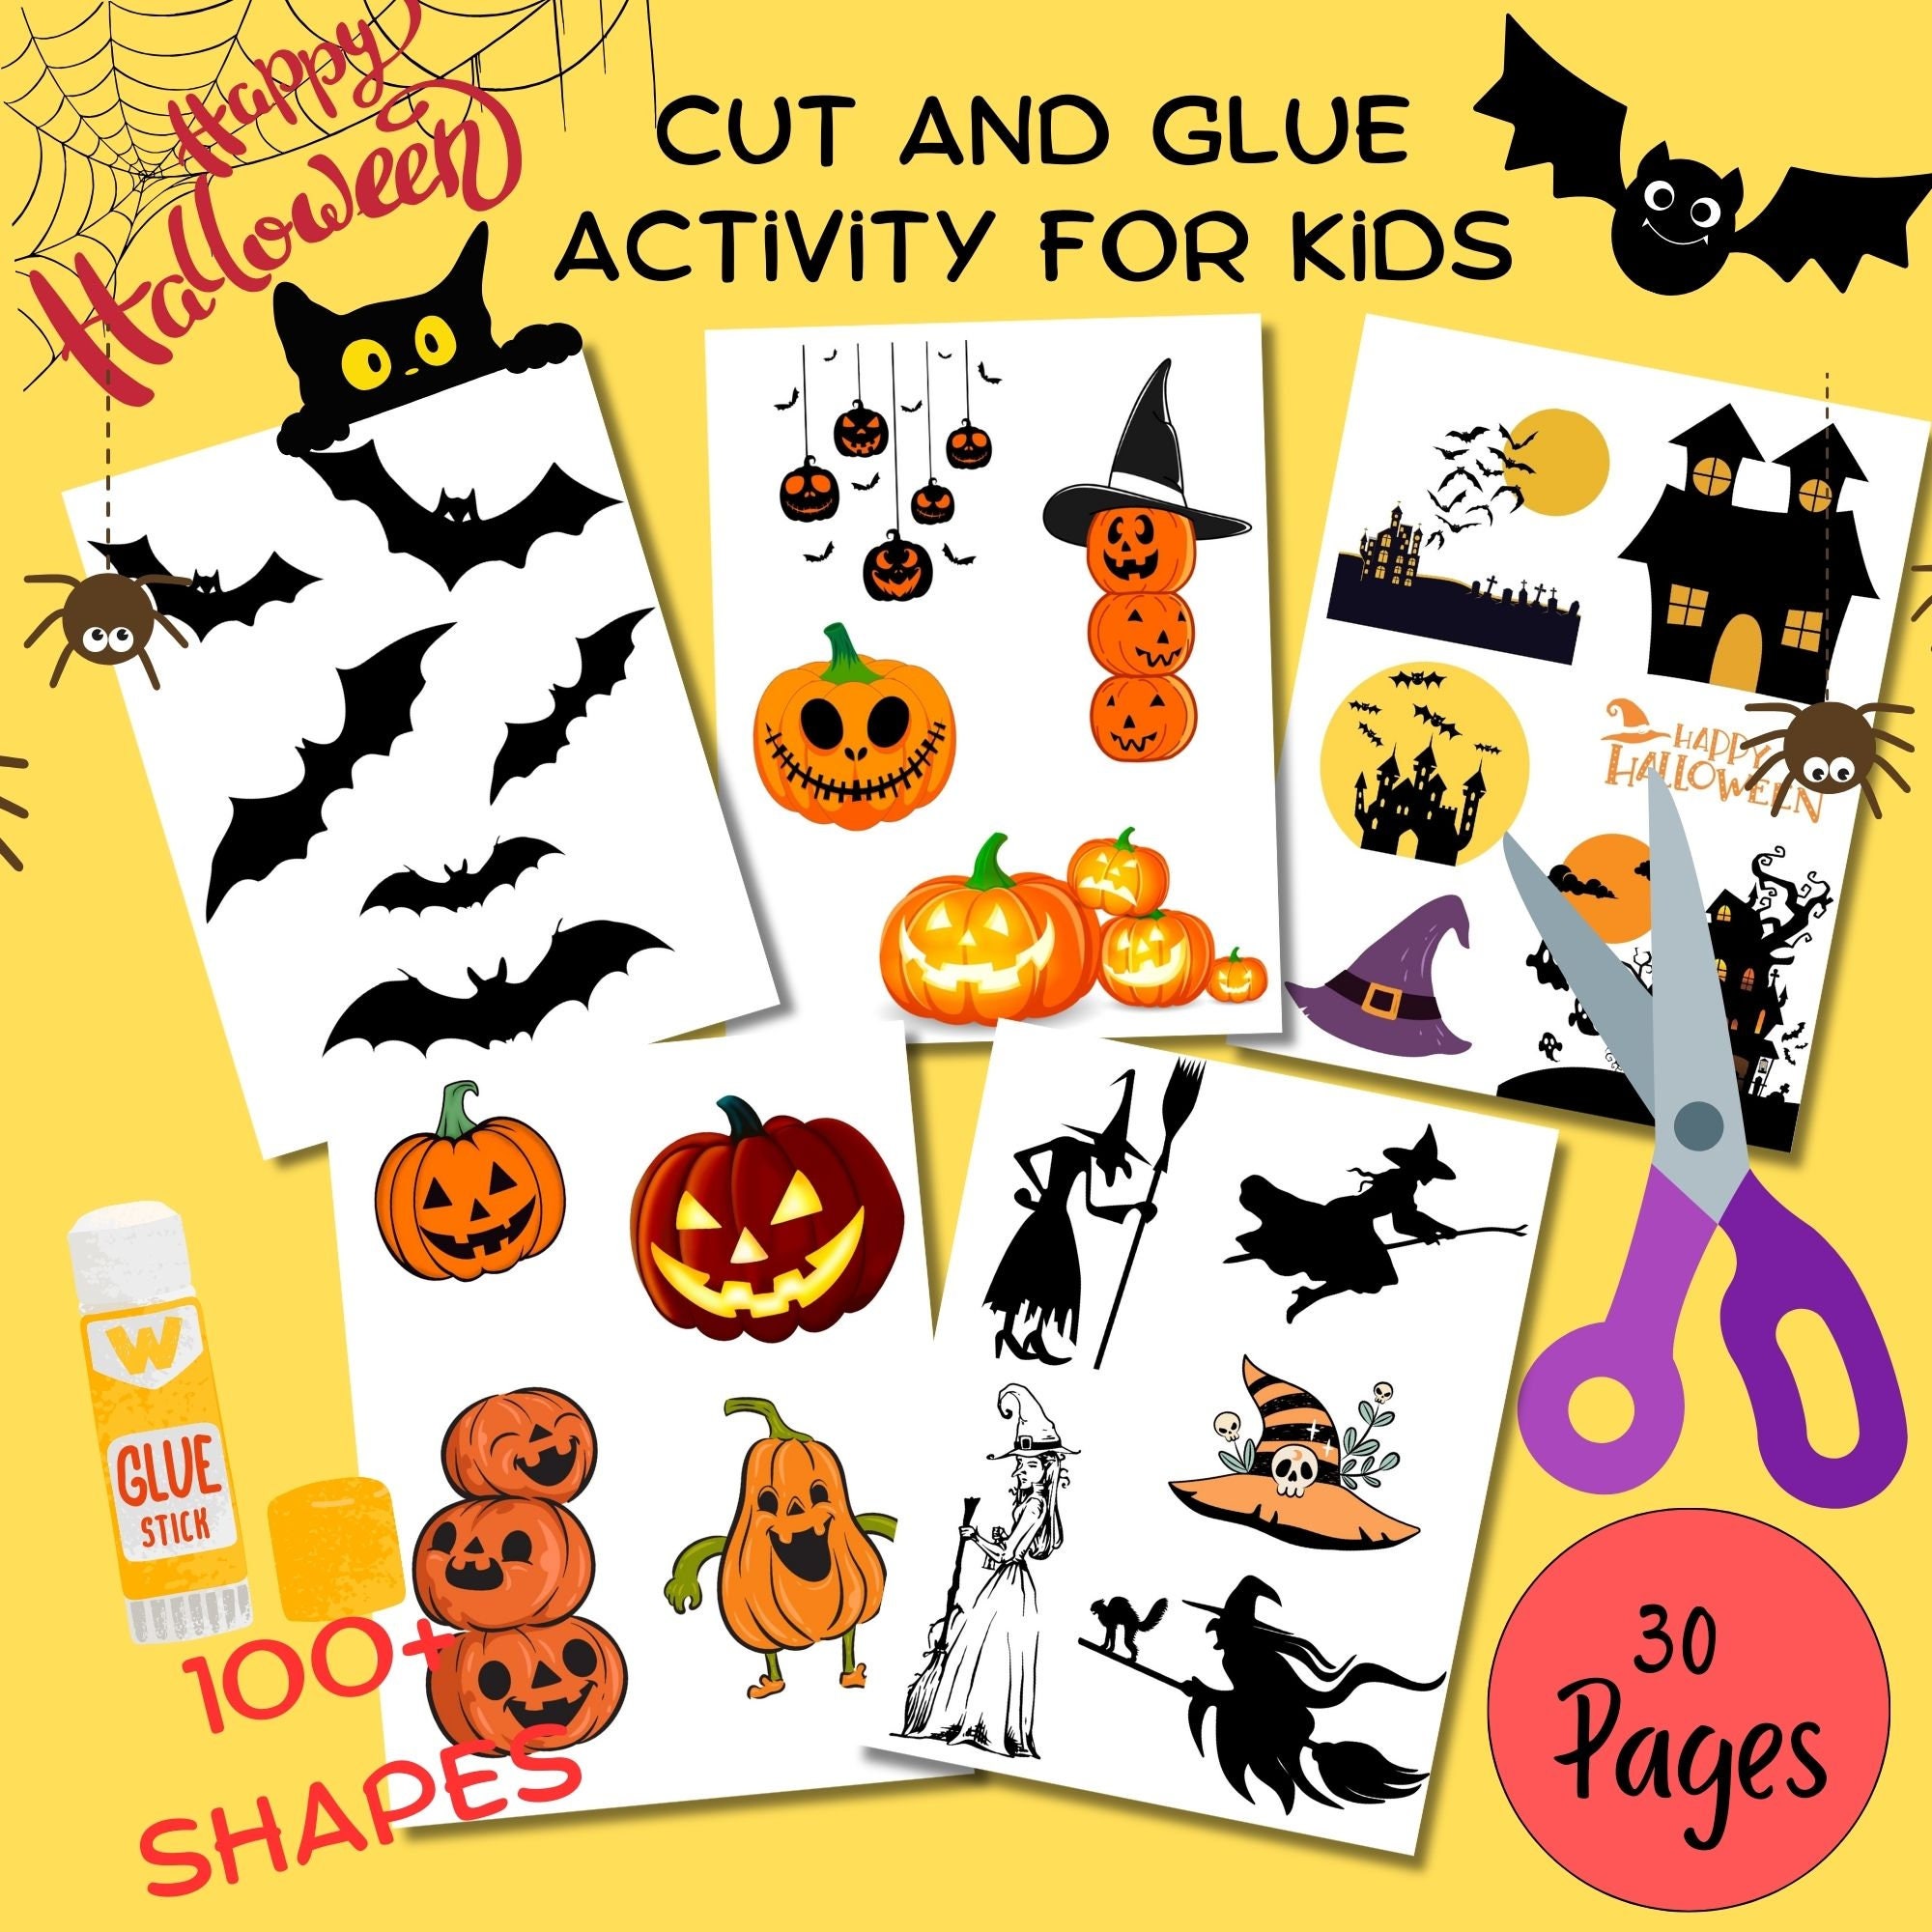 Color Cut Paste: Halloween Cut And Paste Puzzles: Cut And Color Scissor  Skills Workbook For Kids Ages 4-8 (Paperback) 